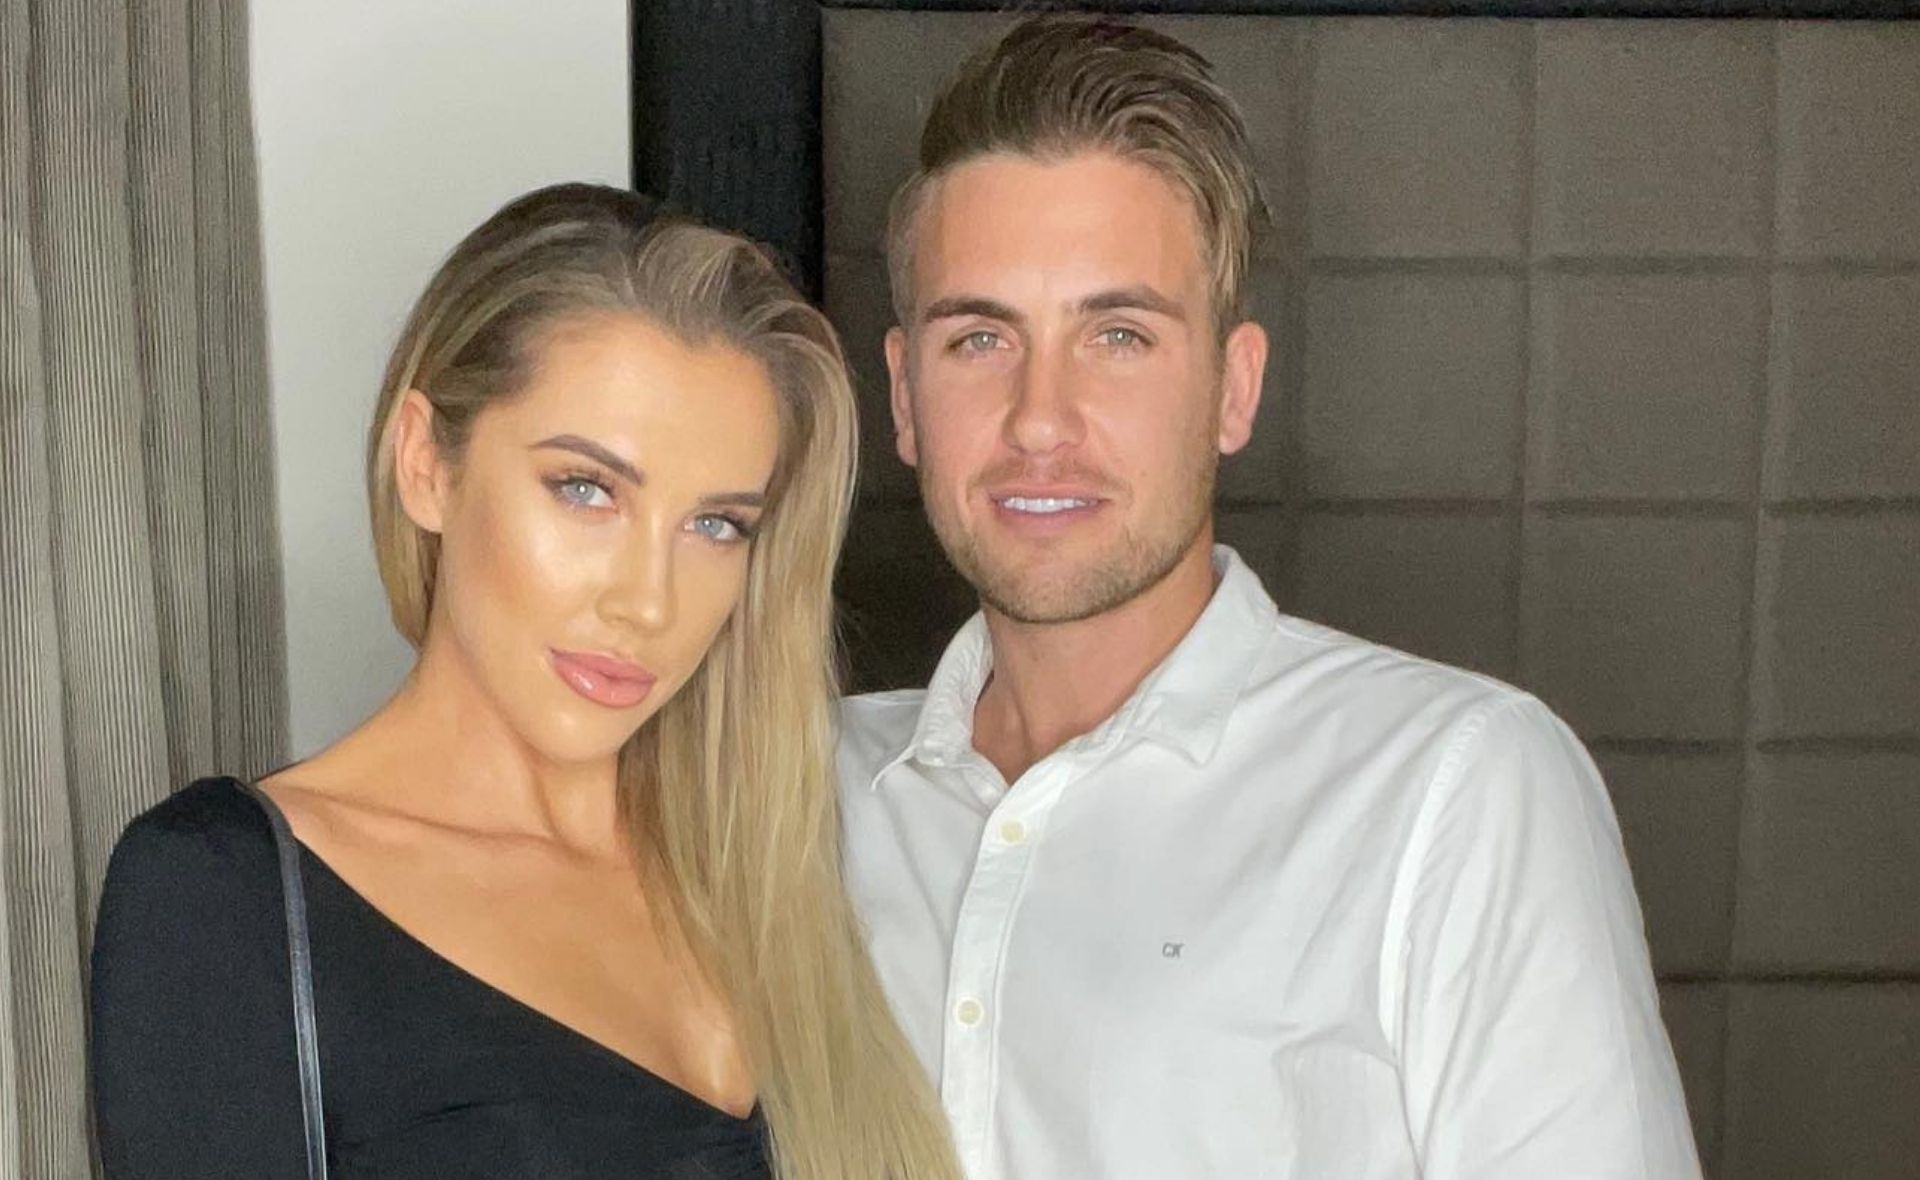 MAFS fans criticised Beck Zemek’s relationship timeline with her partner Ben – but a year later, they couldn’t be more smitten